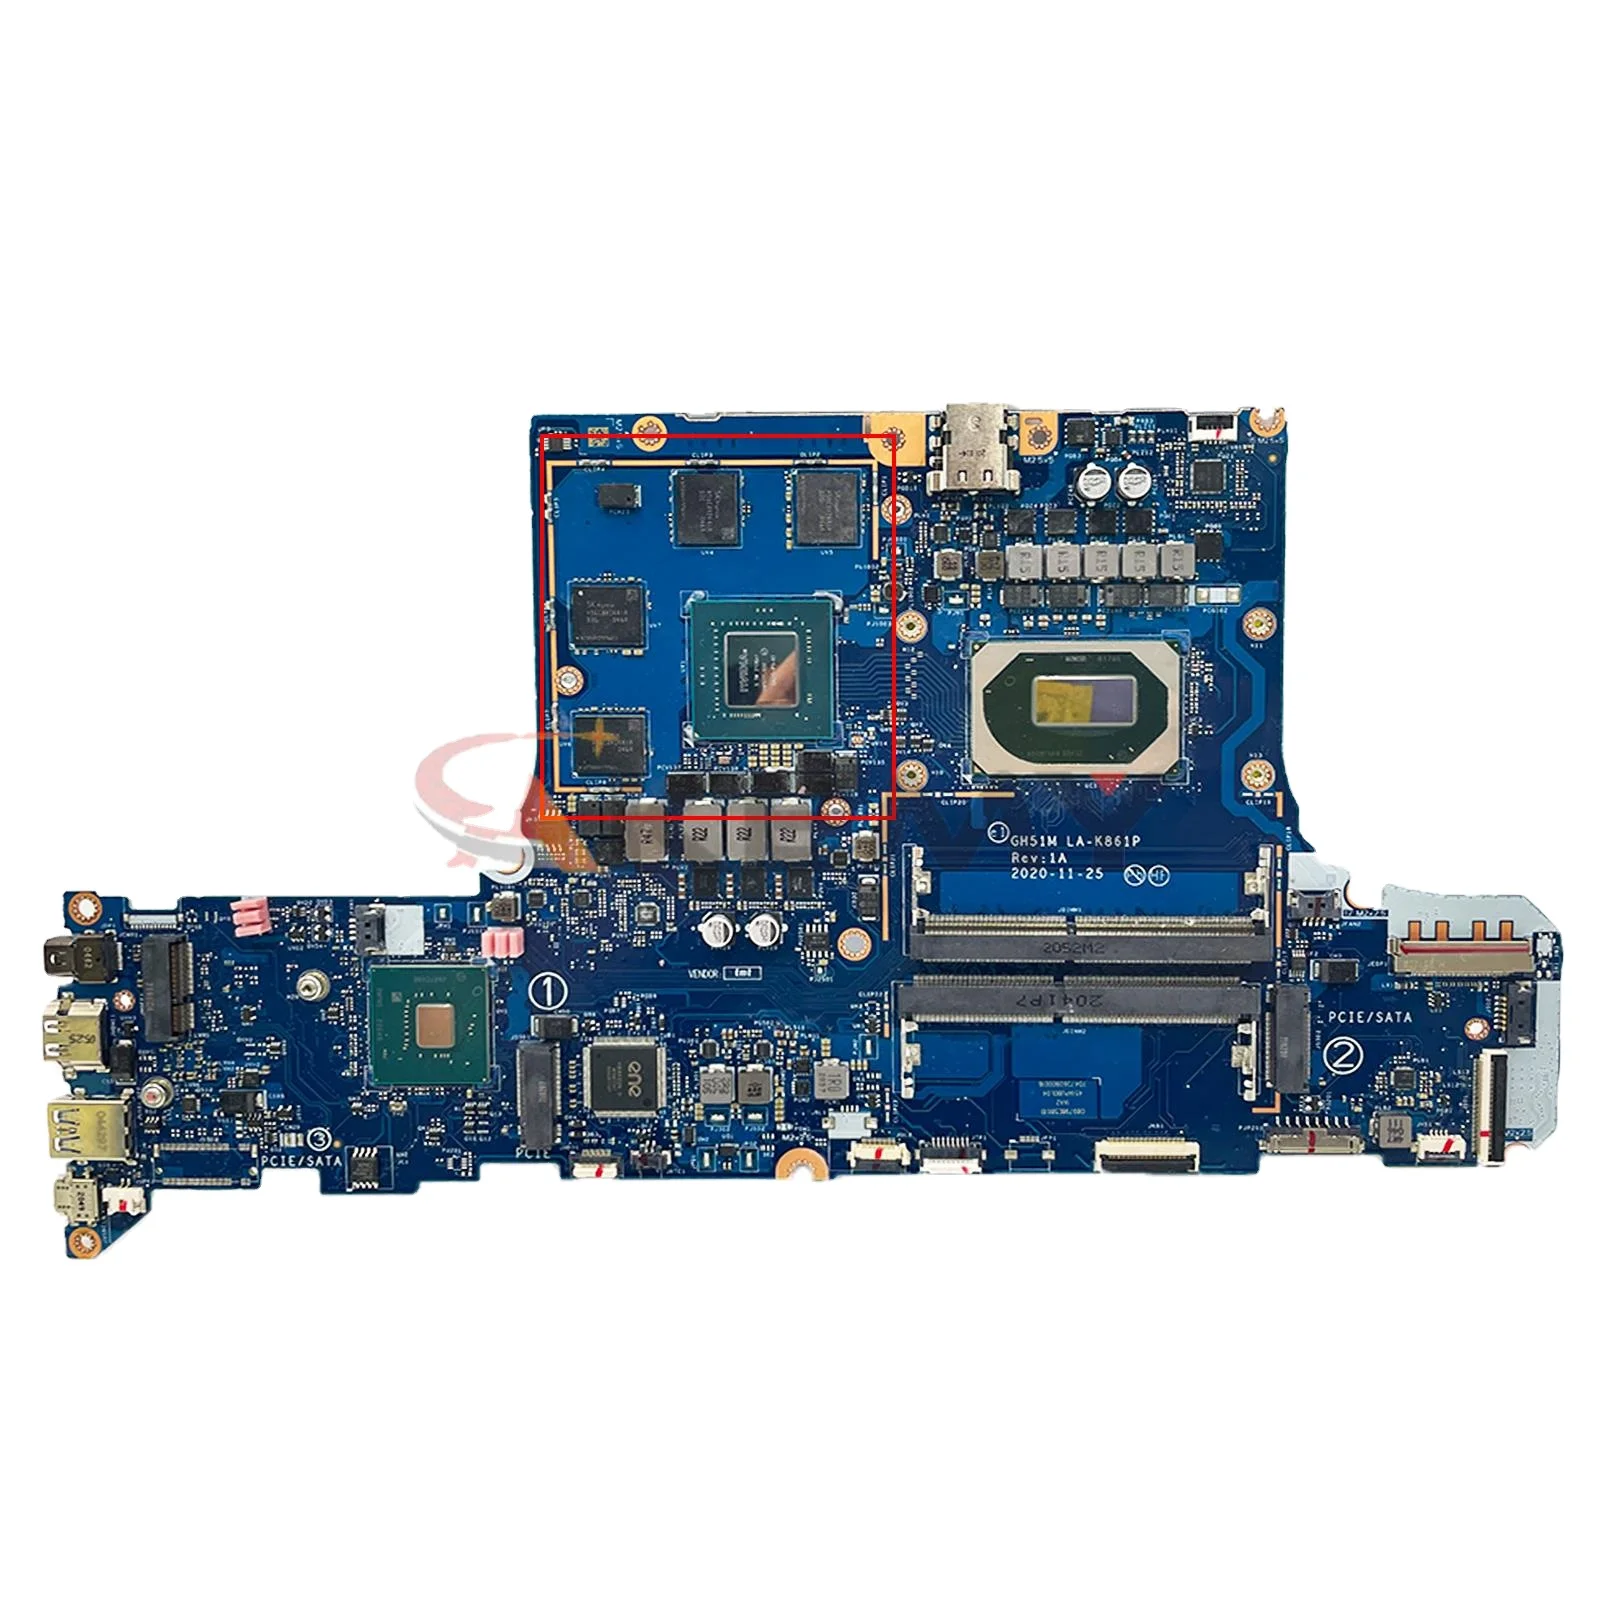 

LA-K861P Motherboard for Acer Nitro 5 AN515-55-59MT Laptop Motherboard with I5-10300H I7-10750H CPU GTX1650 GPU DDR4 100% Tested